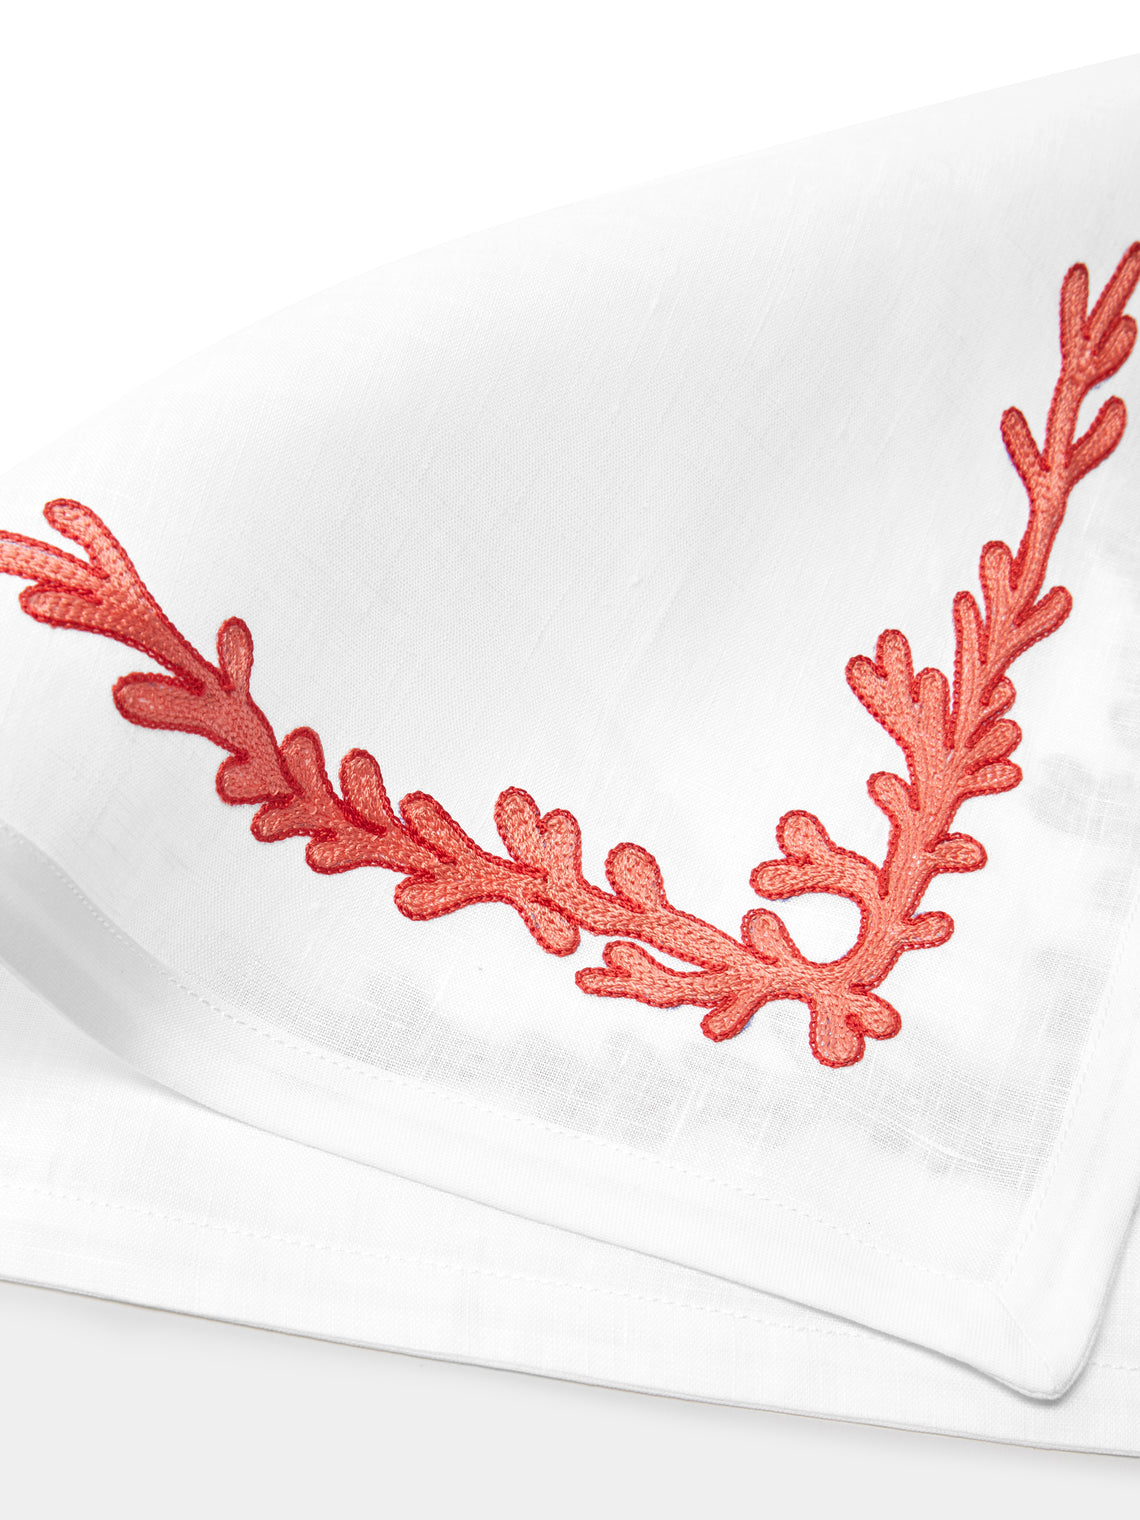 Loretta Caponi - Coral Hand-Embroidered Linen Table Runner - White - ABASK